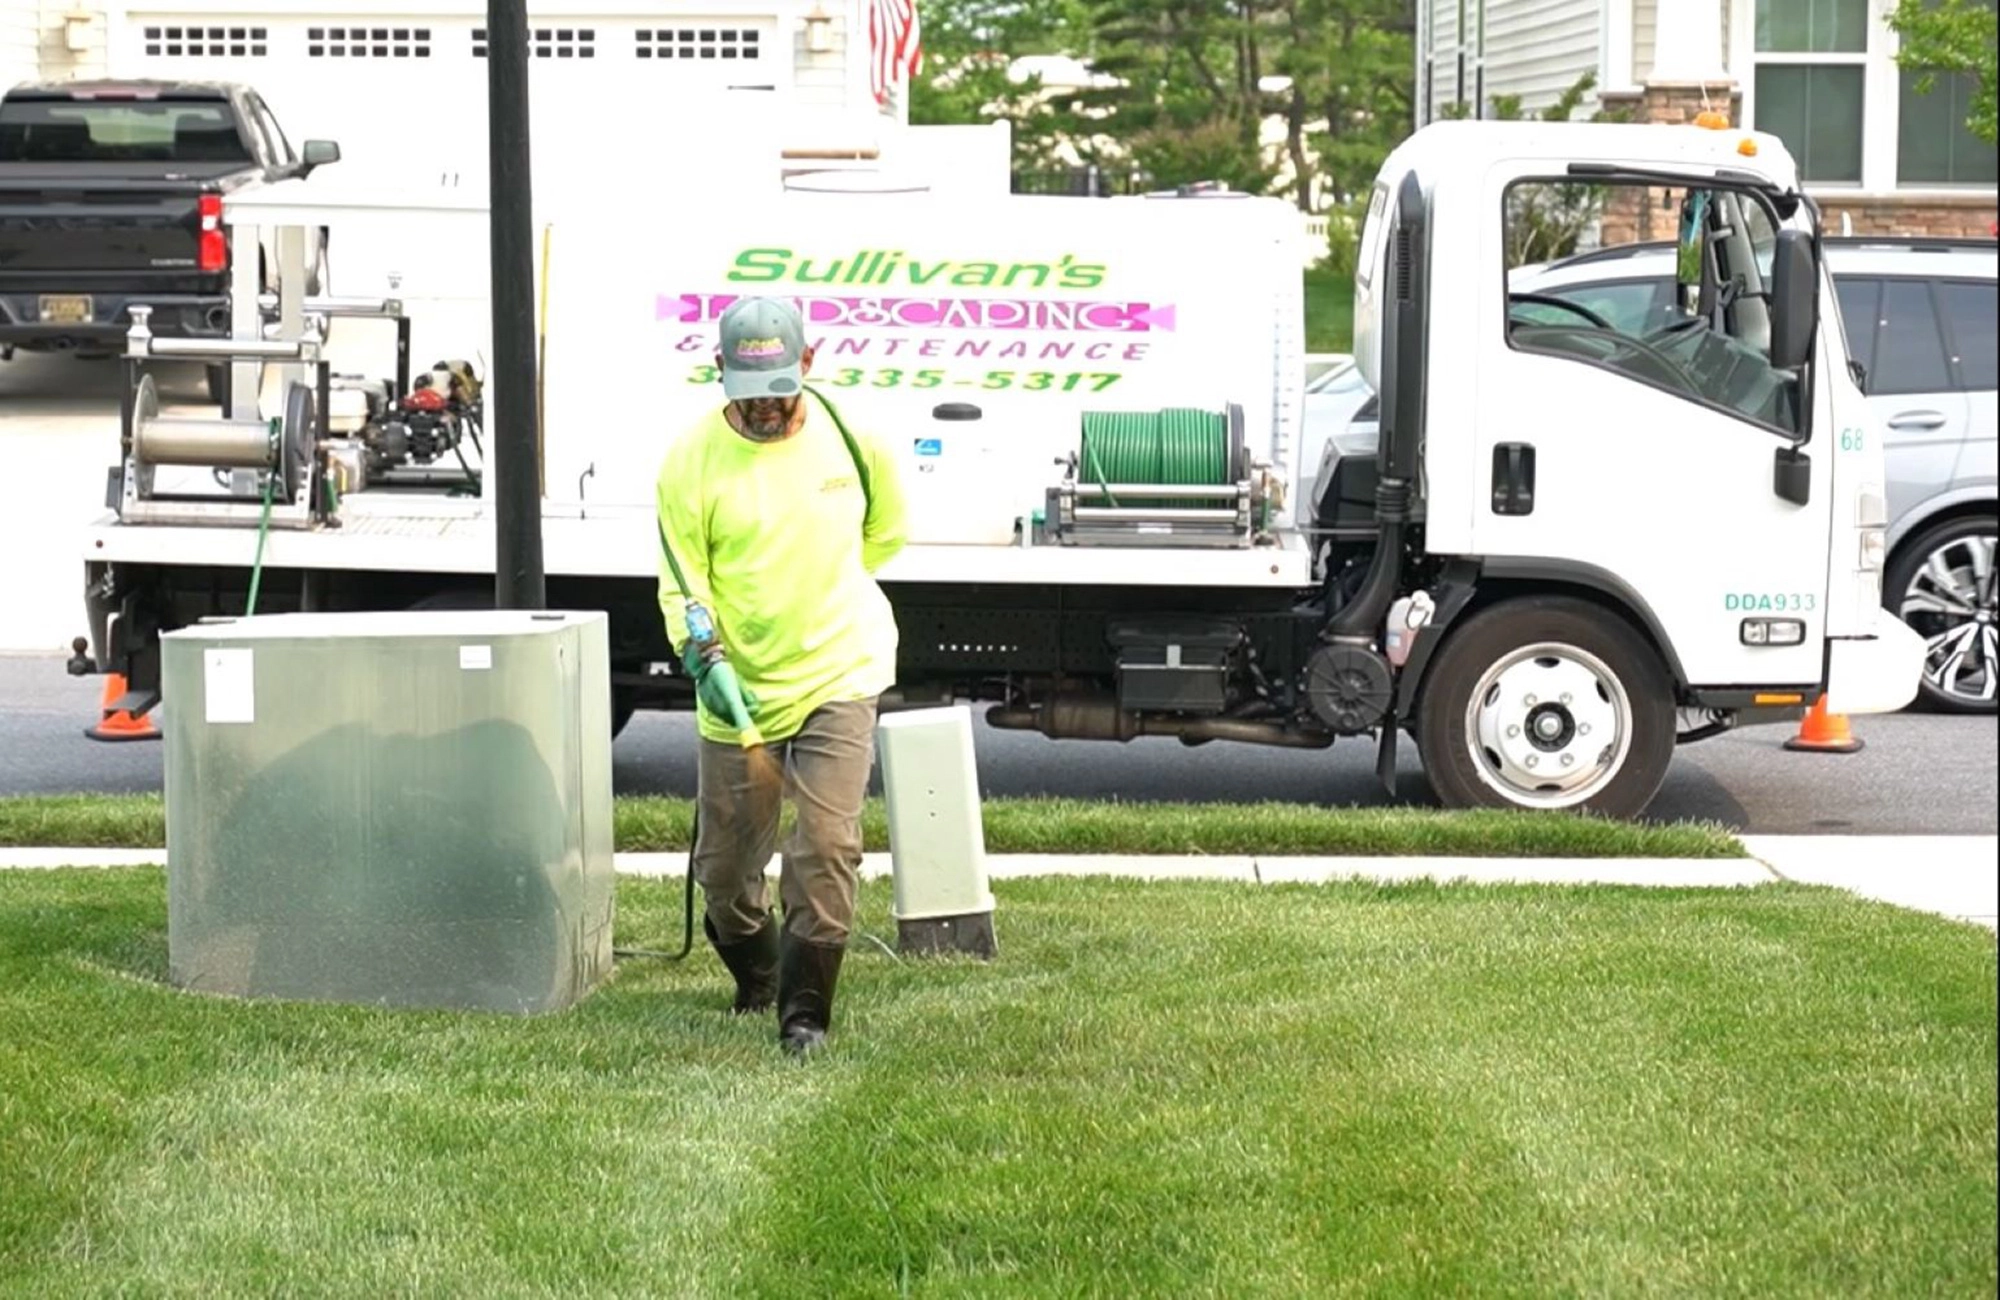 <h3>Lawn Healthcare Applications</h3>
<p>Get ready to be the talk of the neighborhood with Sullivan's Landscaping! Our team of experts is here to help you achieve the lush, envy-worthy lawn you've always dreamed of. Whether you need assistance with lawn maintenance or a complete landscape transformation, we've got you covered.</p>
<p><br /><br /></p>